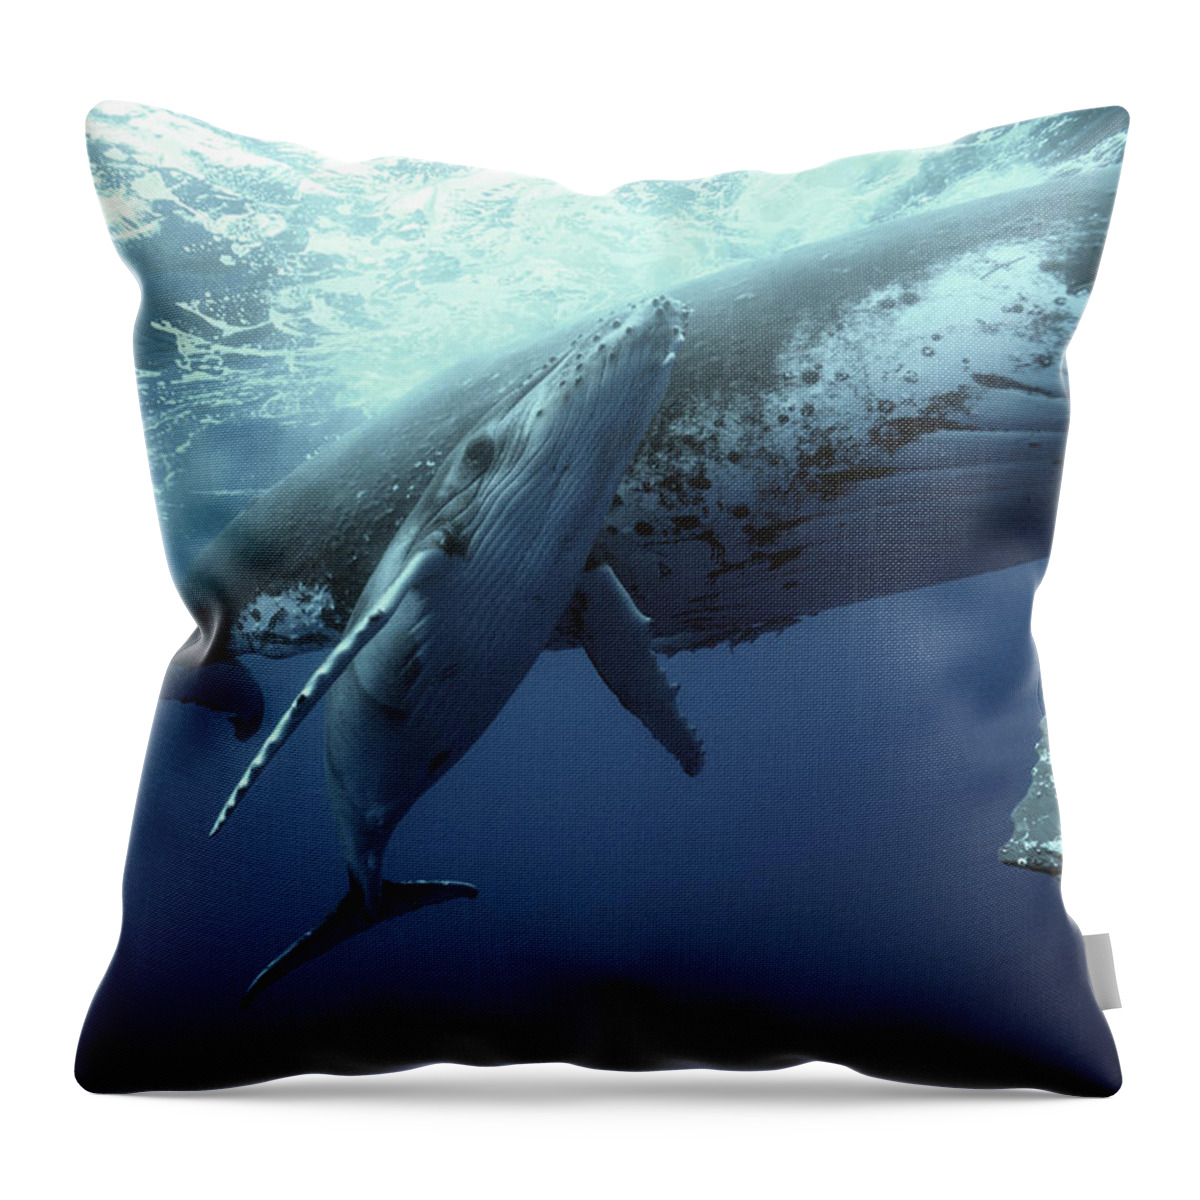 00700233 Throw Pillow featuring the photograph Humpback Whale and Calf by Mike Parry